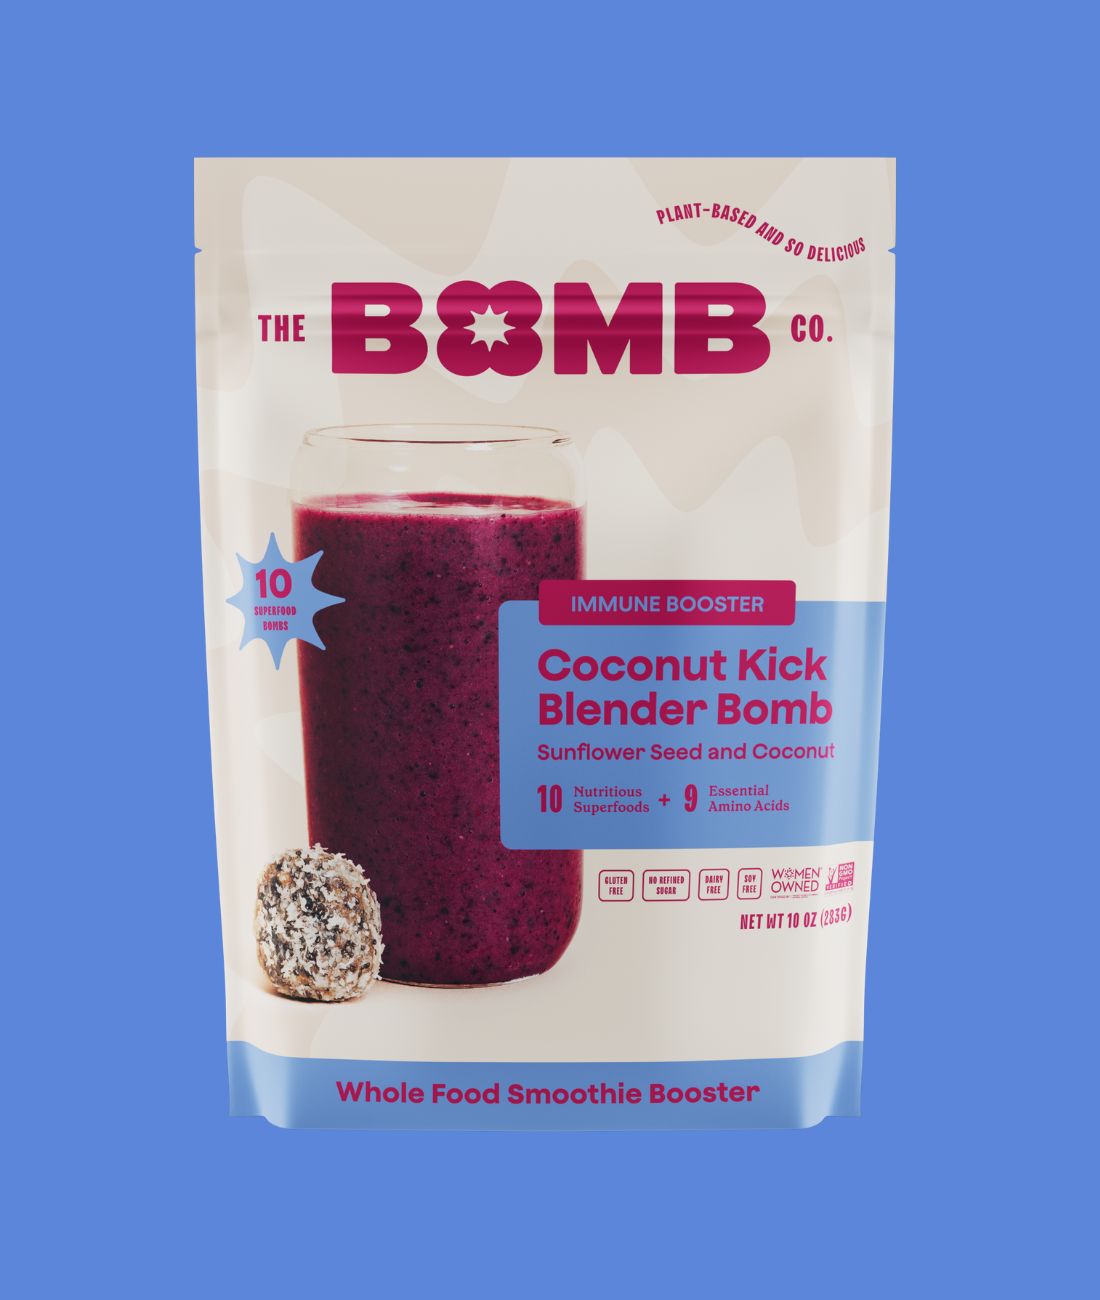 Blender Bombs Smoothie Booster: Sunflower Seed & Coconut